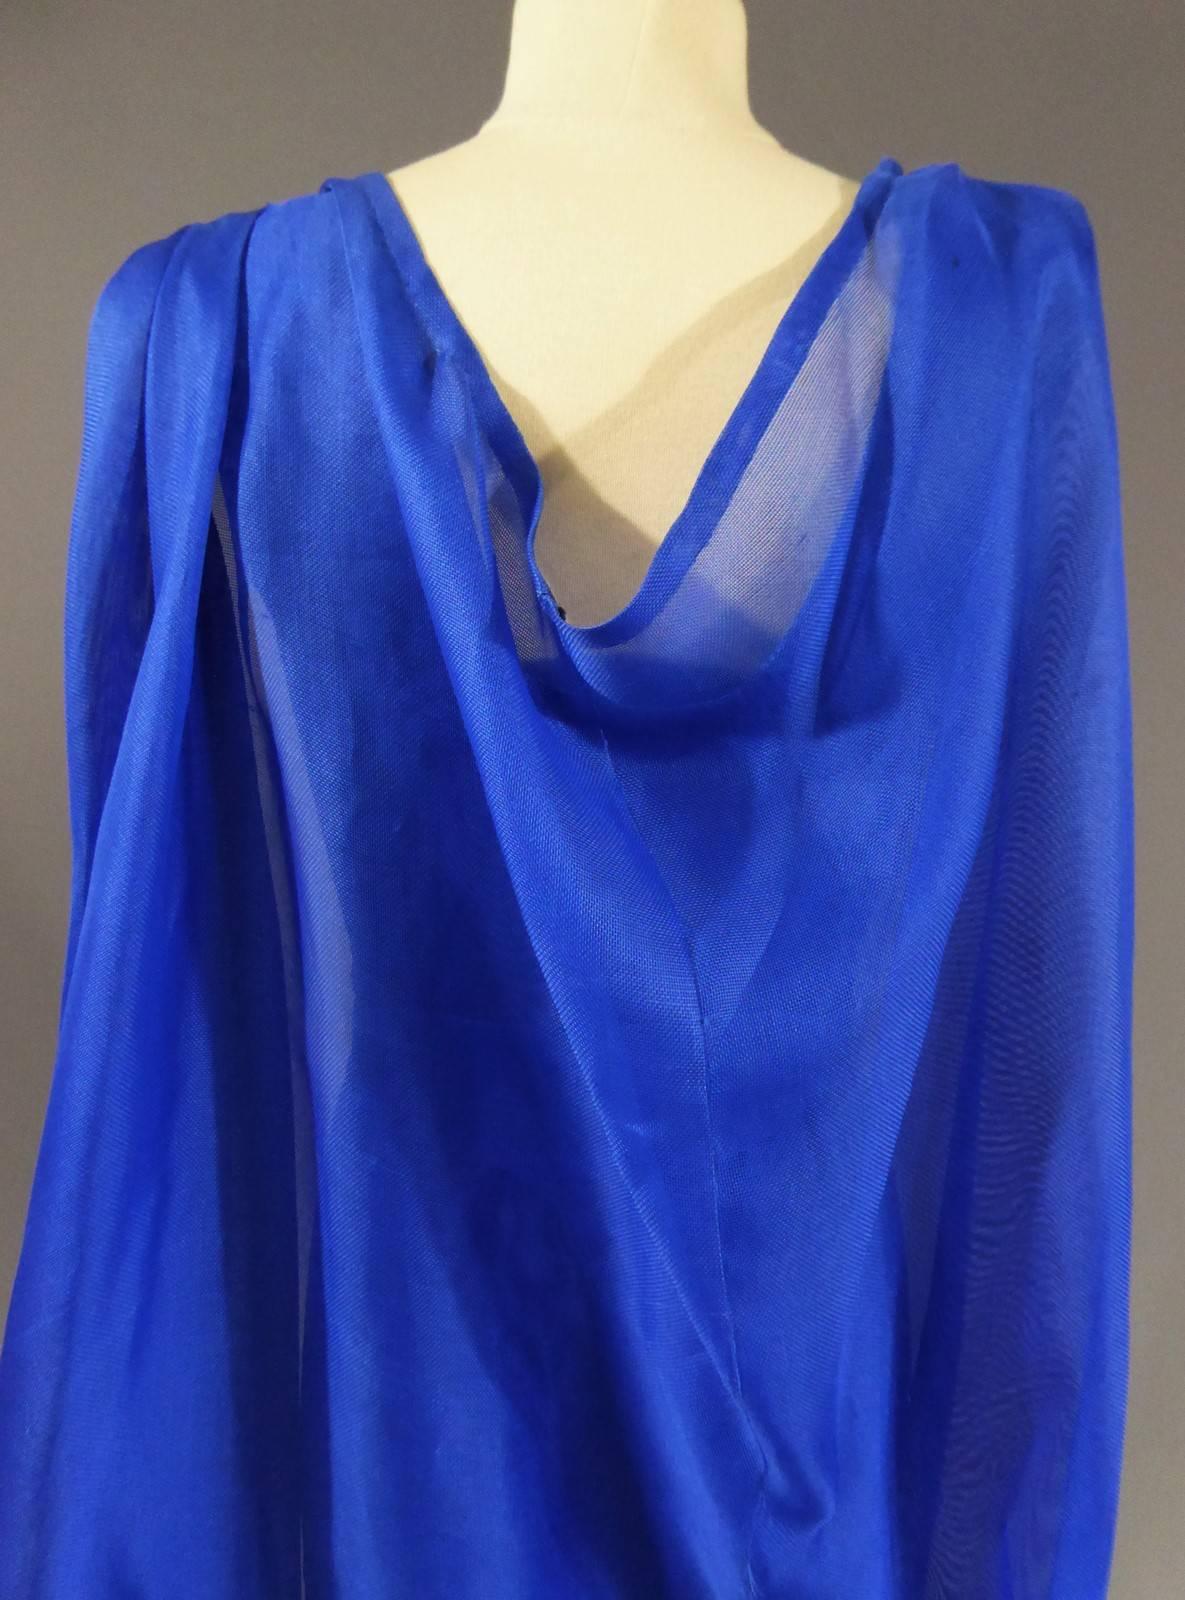 Hubert de Givenchy Numbered 97 4